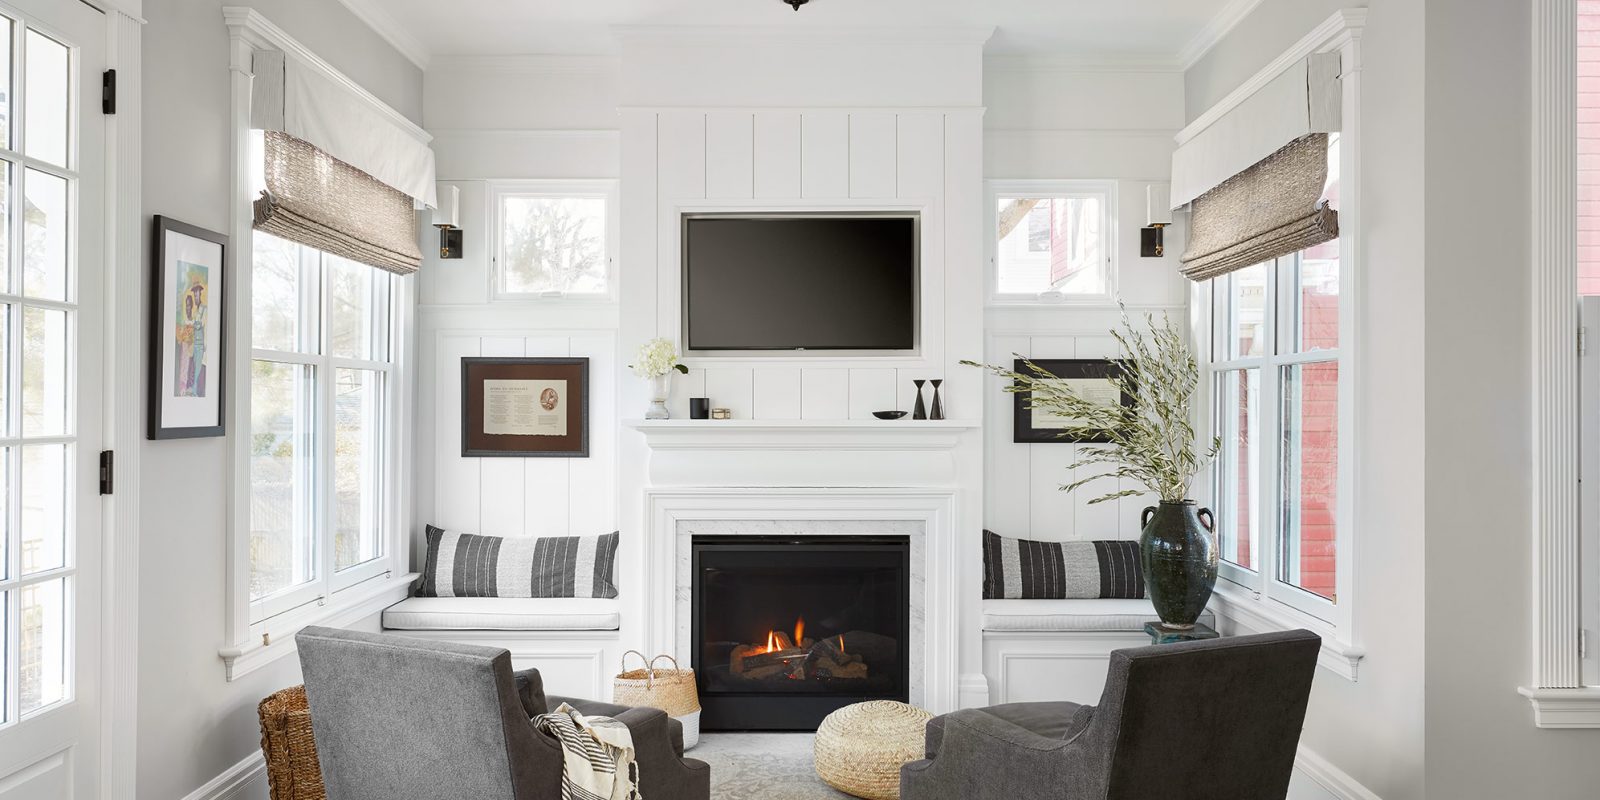 Fireplace with classic style trim and built-in seating